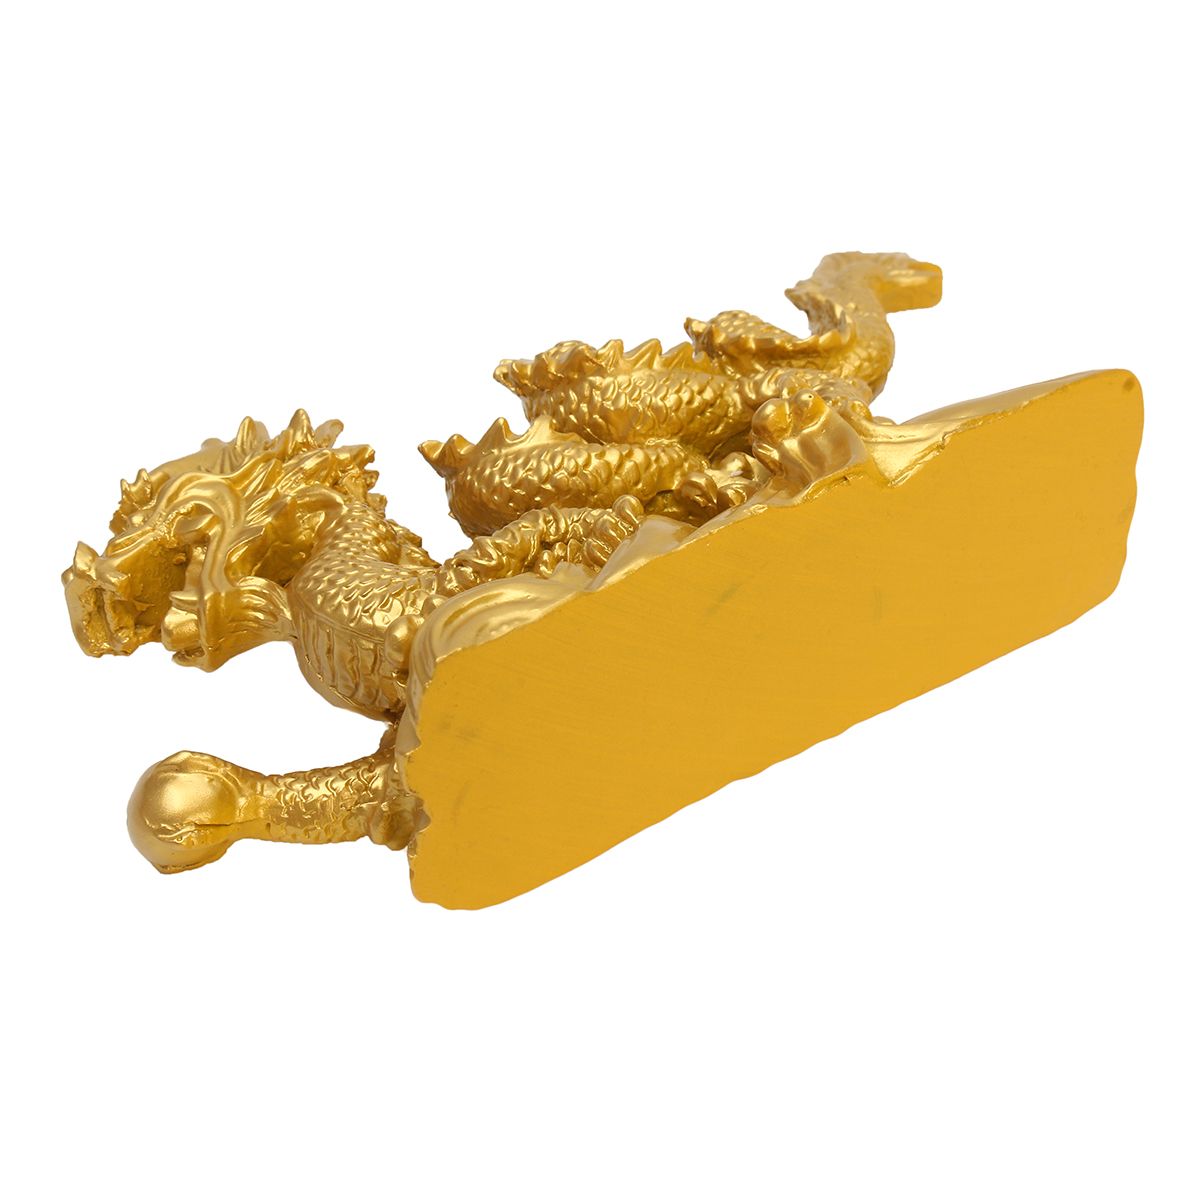 Resin-Gold-Dragon-Figurine-Statue-Ornaments-Chinese-Geomancy-Home-Office-Decoration-1225050